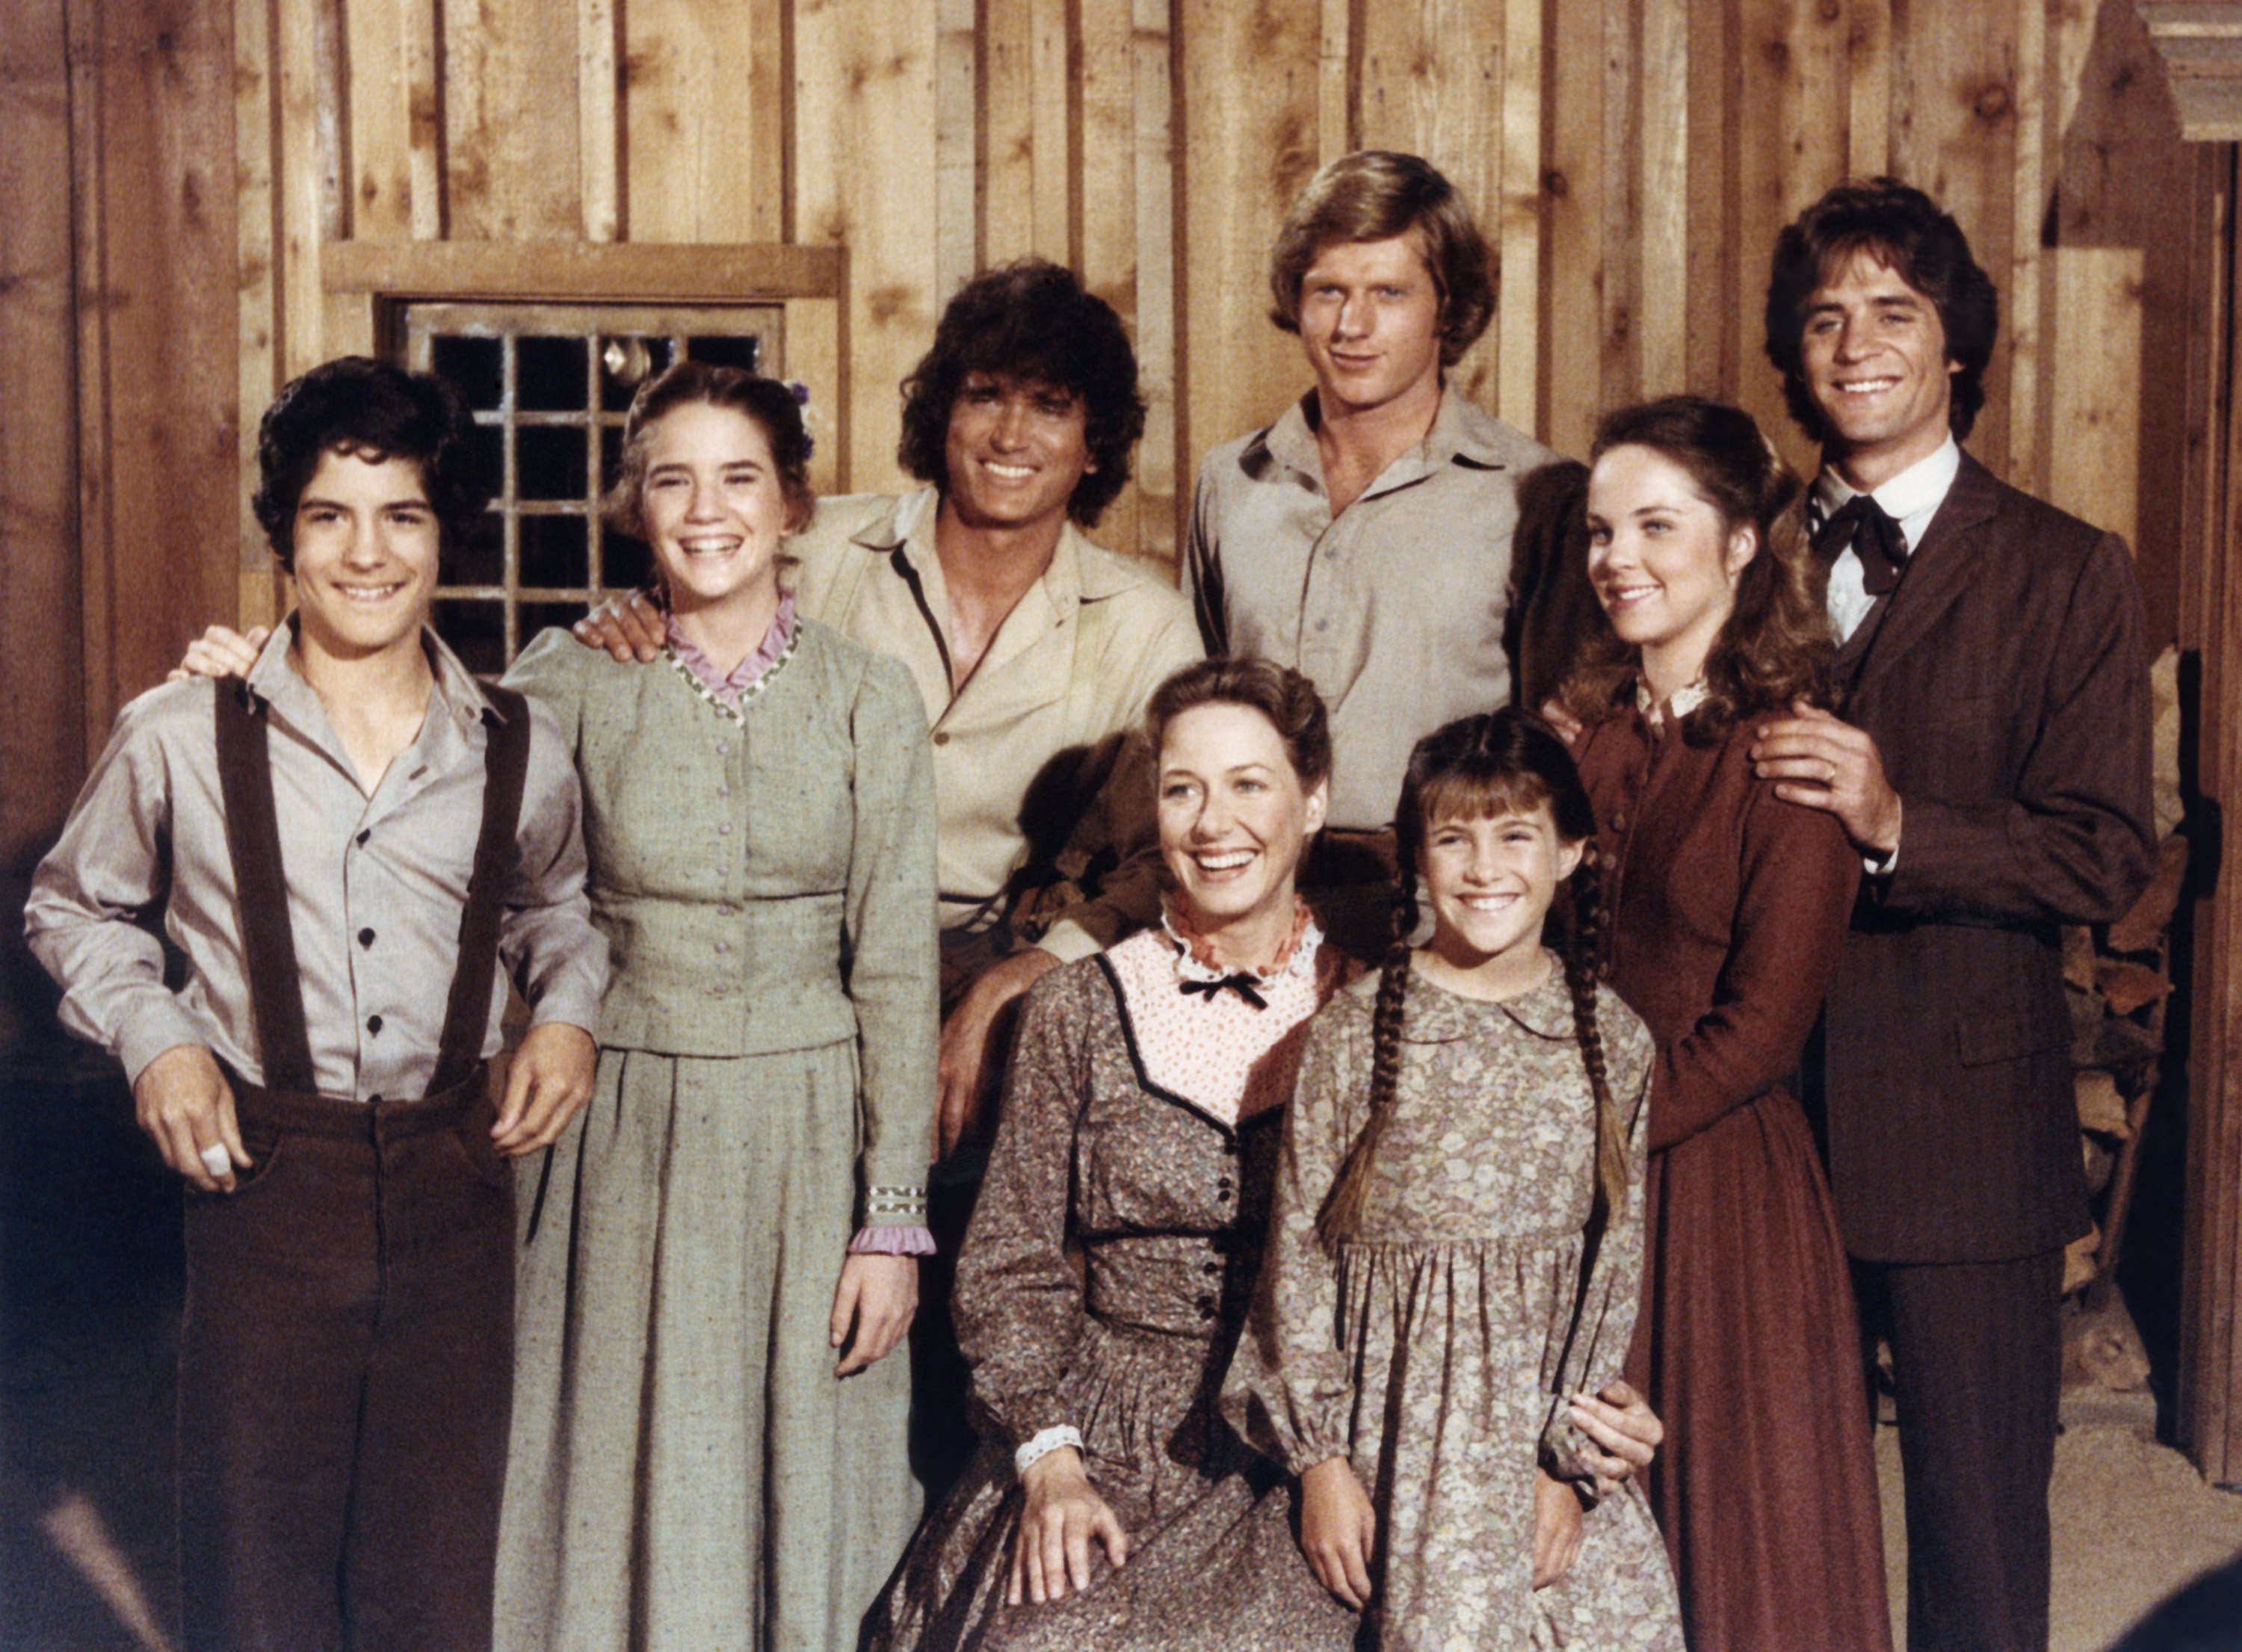 Pictured: (Top L-R) Actors Matthew Laborteaux as Albert Quinn Ingalls, Melissa Gilbert as Laura Elizabeth Ingalls Wilder, Michael Landon as Charles Philip Ingalls, Dean Butler as Almanzo James Wilder, Melissa Sue Anderson as Mary Ingalls Kendall, Linwood Boomer as Adam Kendall, (Bottom L-R) Karen Grassle as Caroline Quiner Holbrook Ingalls, Lindsay/Sidney Greenbush as Carrie Ingalls on "Little House on the Prairie." / Source: Getty Images